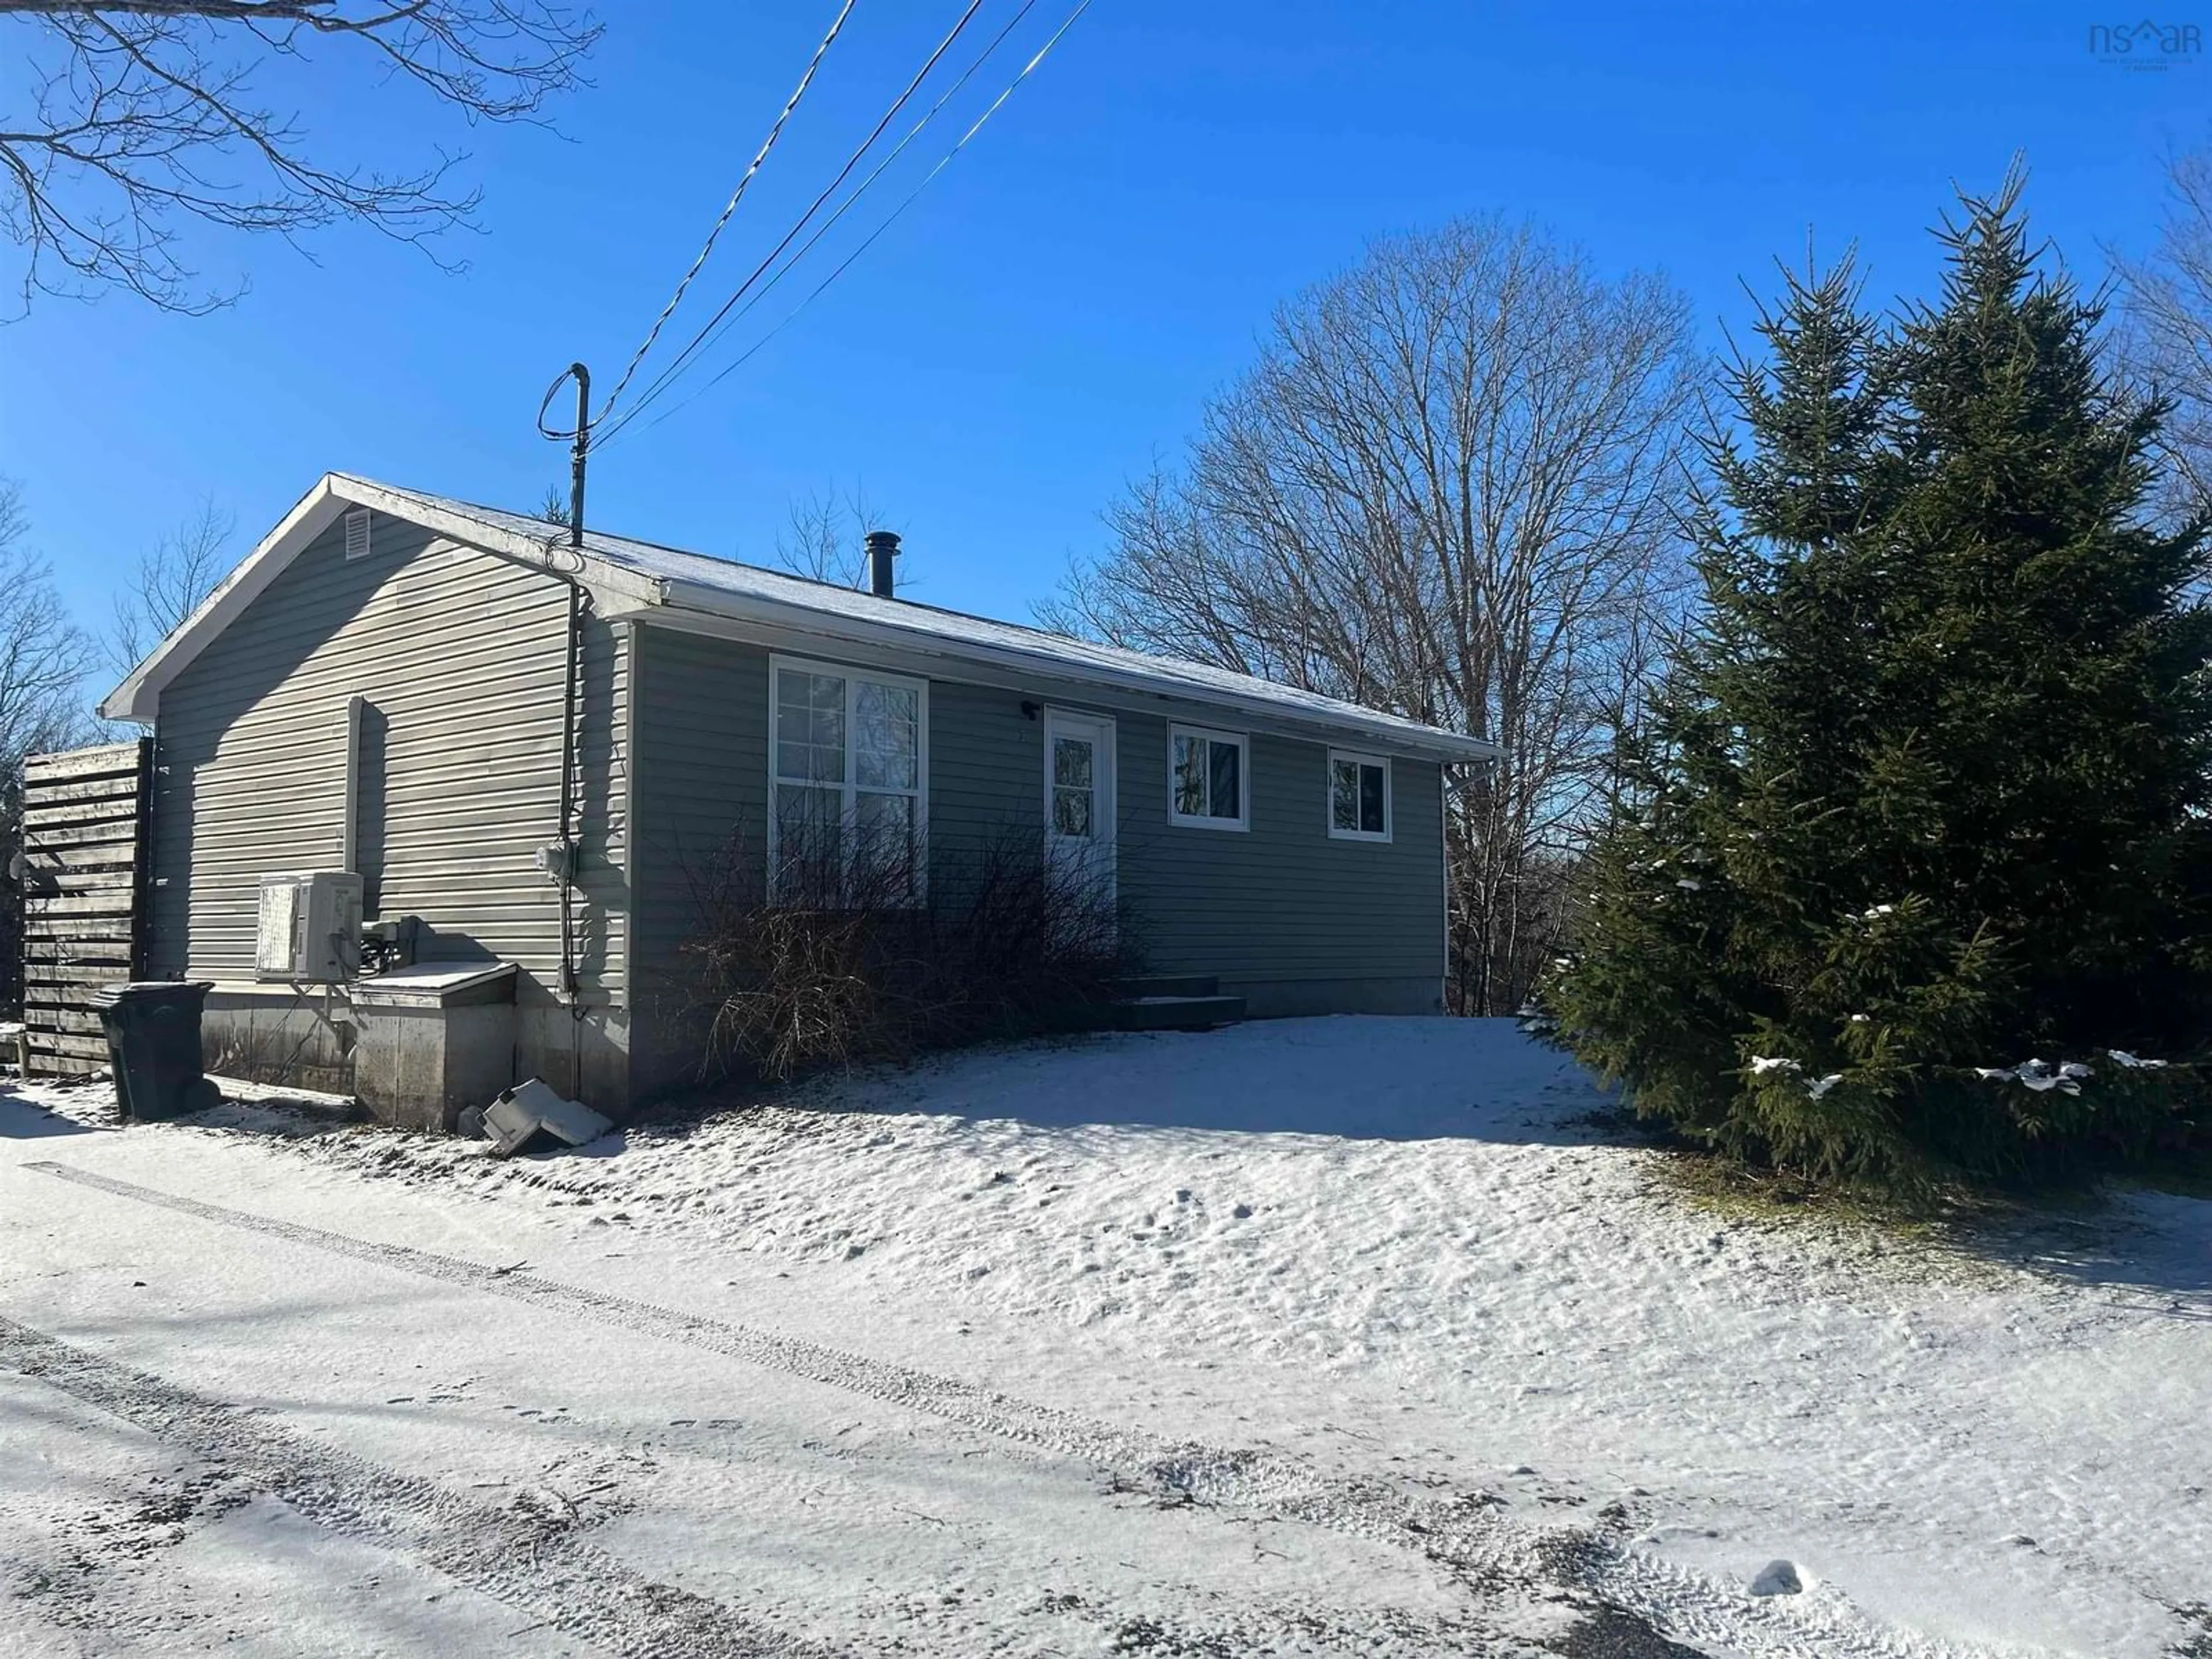 Home with unknown exterior material for 24 Smith Rd, Hilden Nova Scotia B0N 1C0